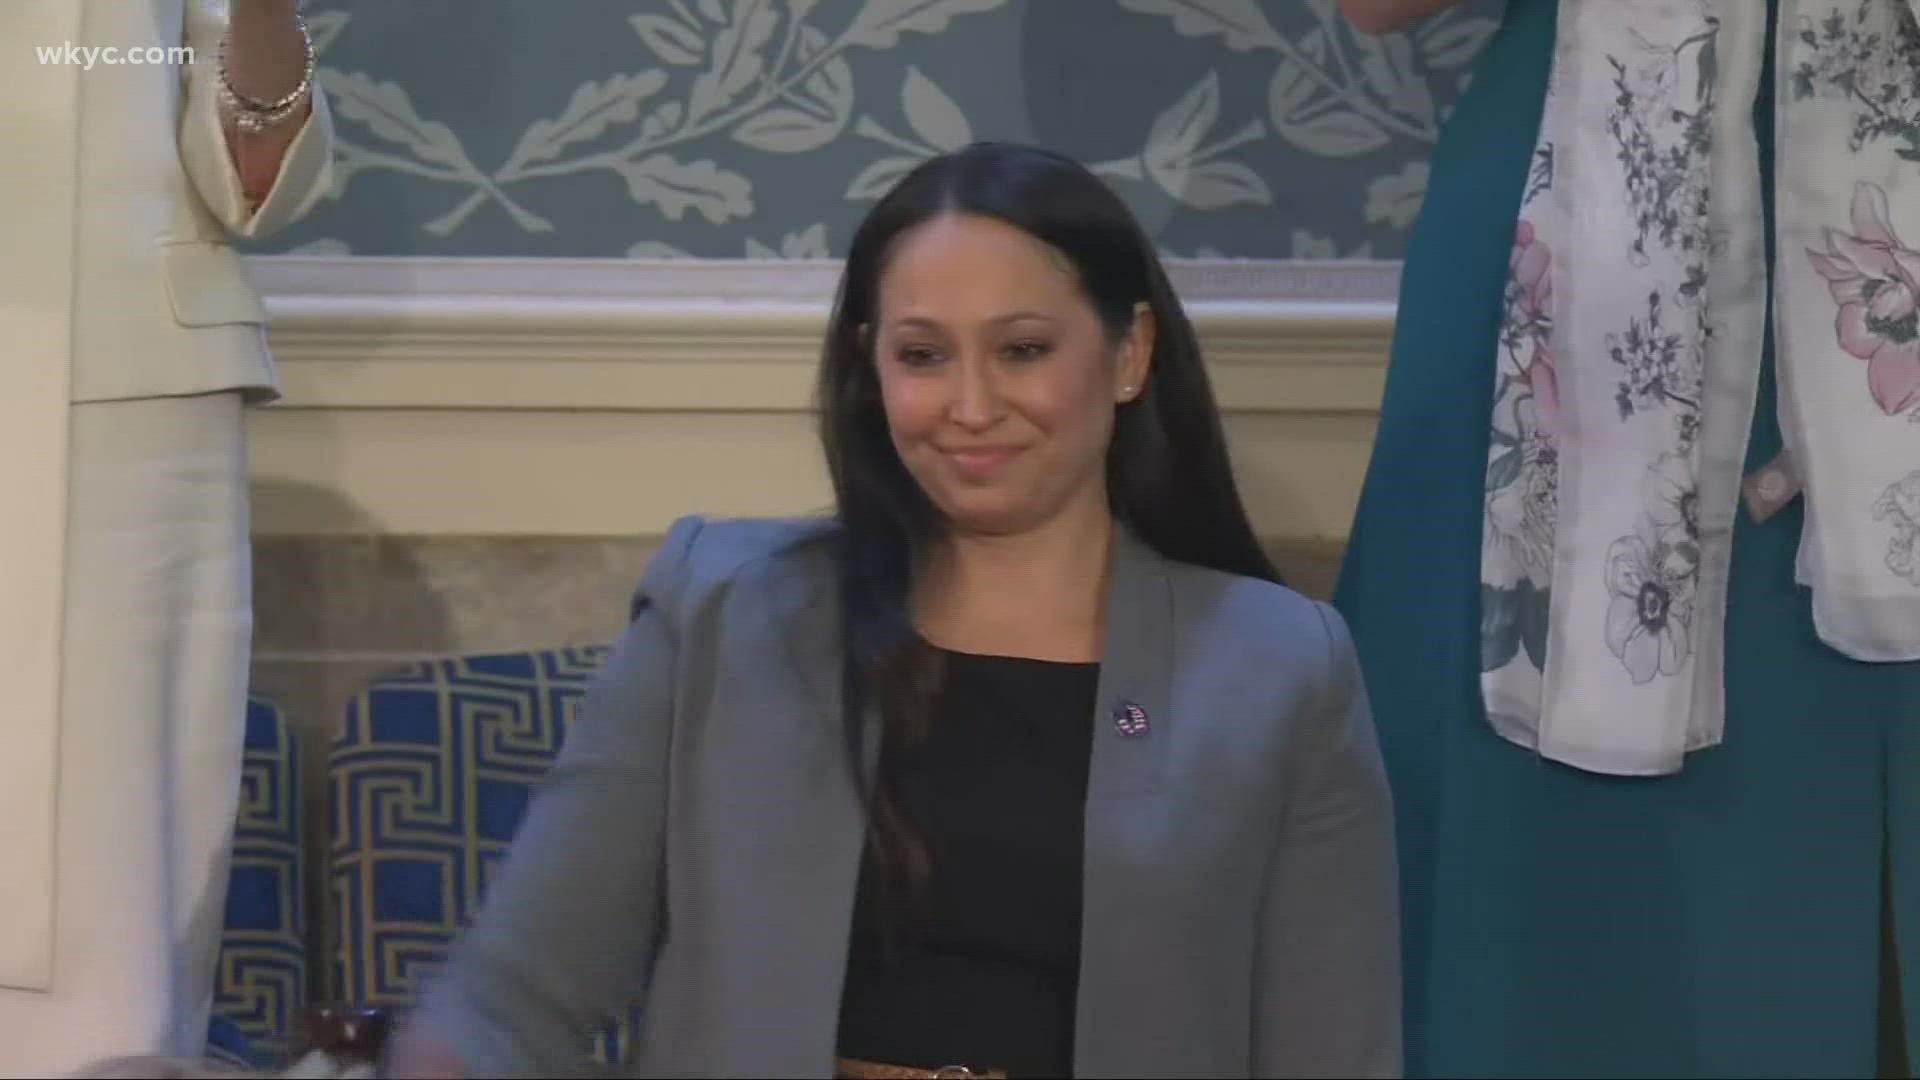 Danielle Robinson was given a standing ovation in Washington. Her husband, Heath, passed away from cancer after exposure to burn pits while serving.